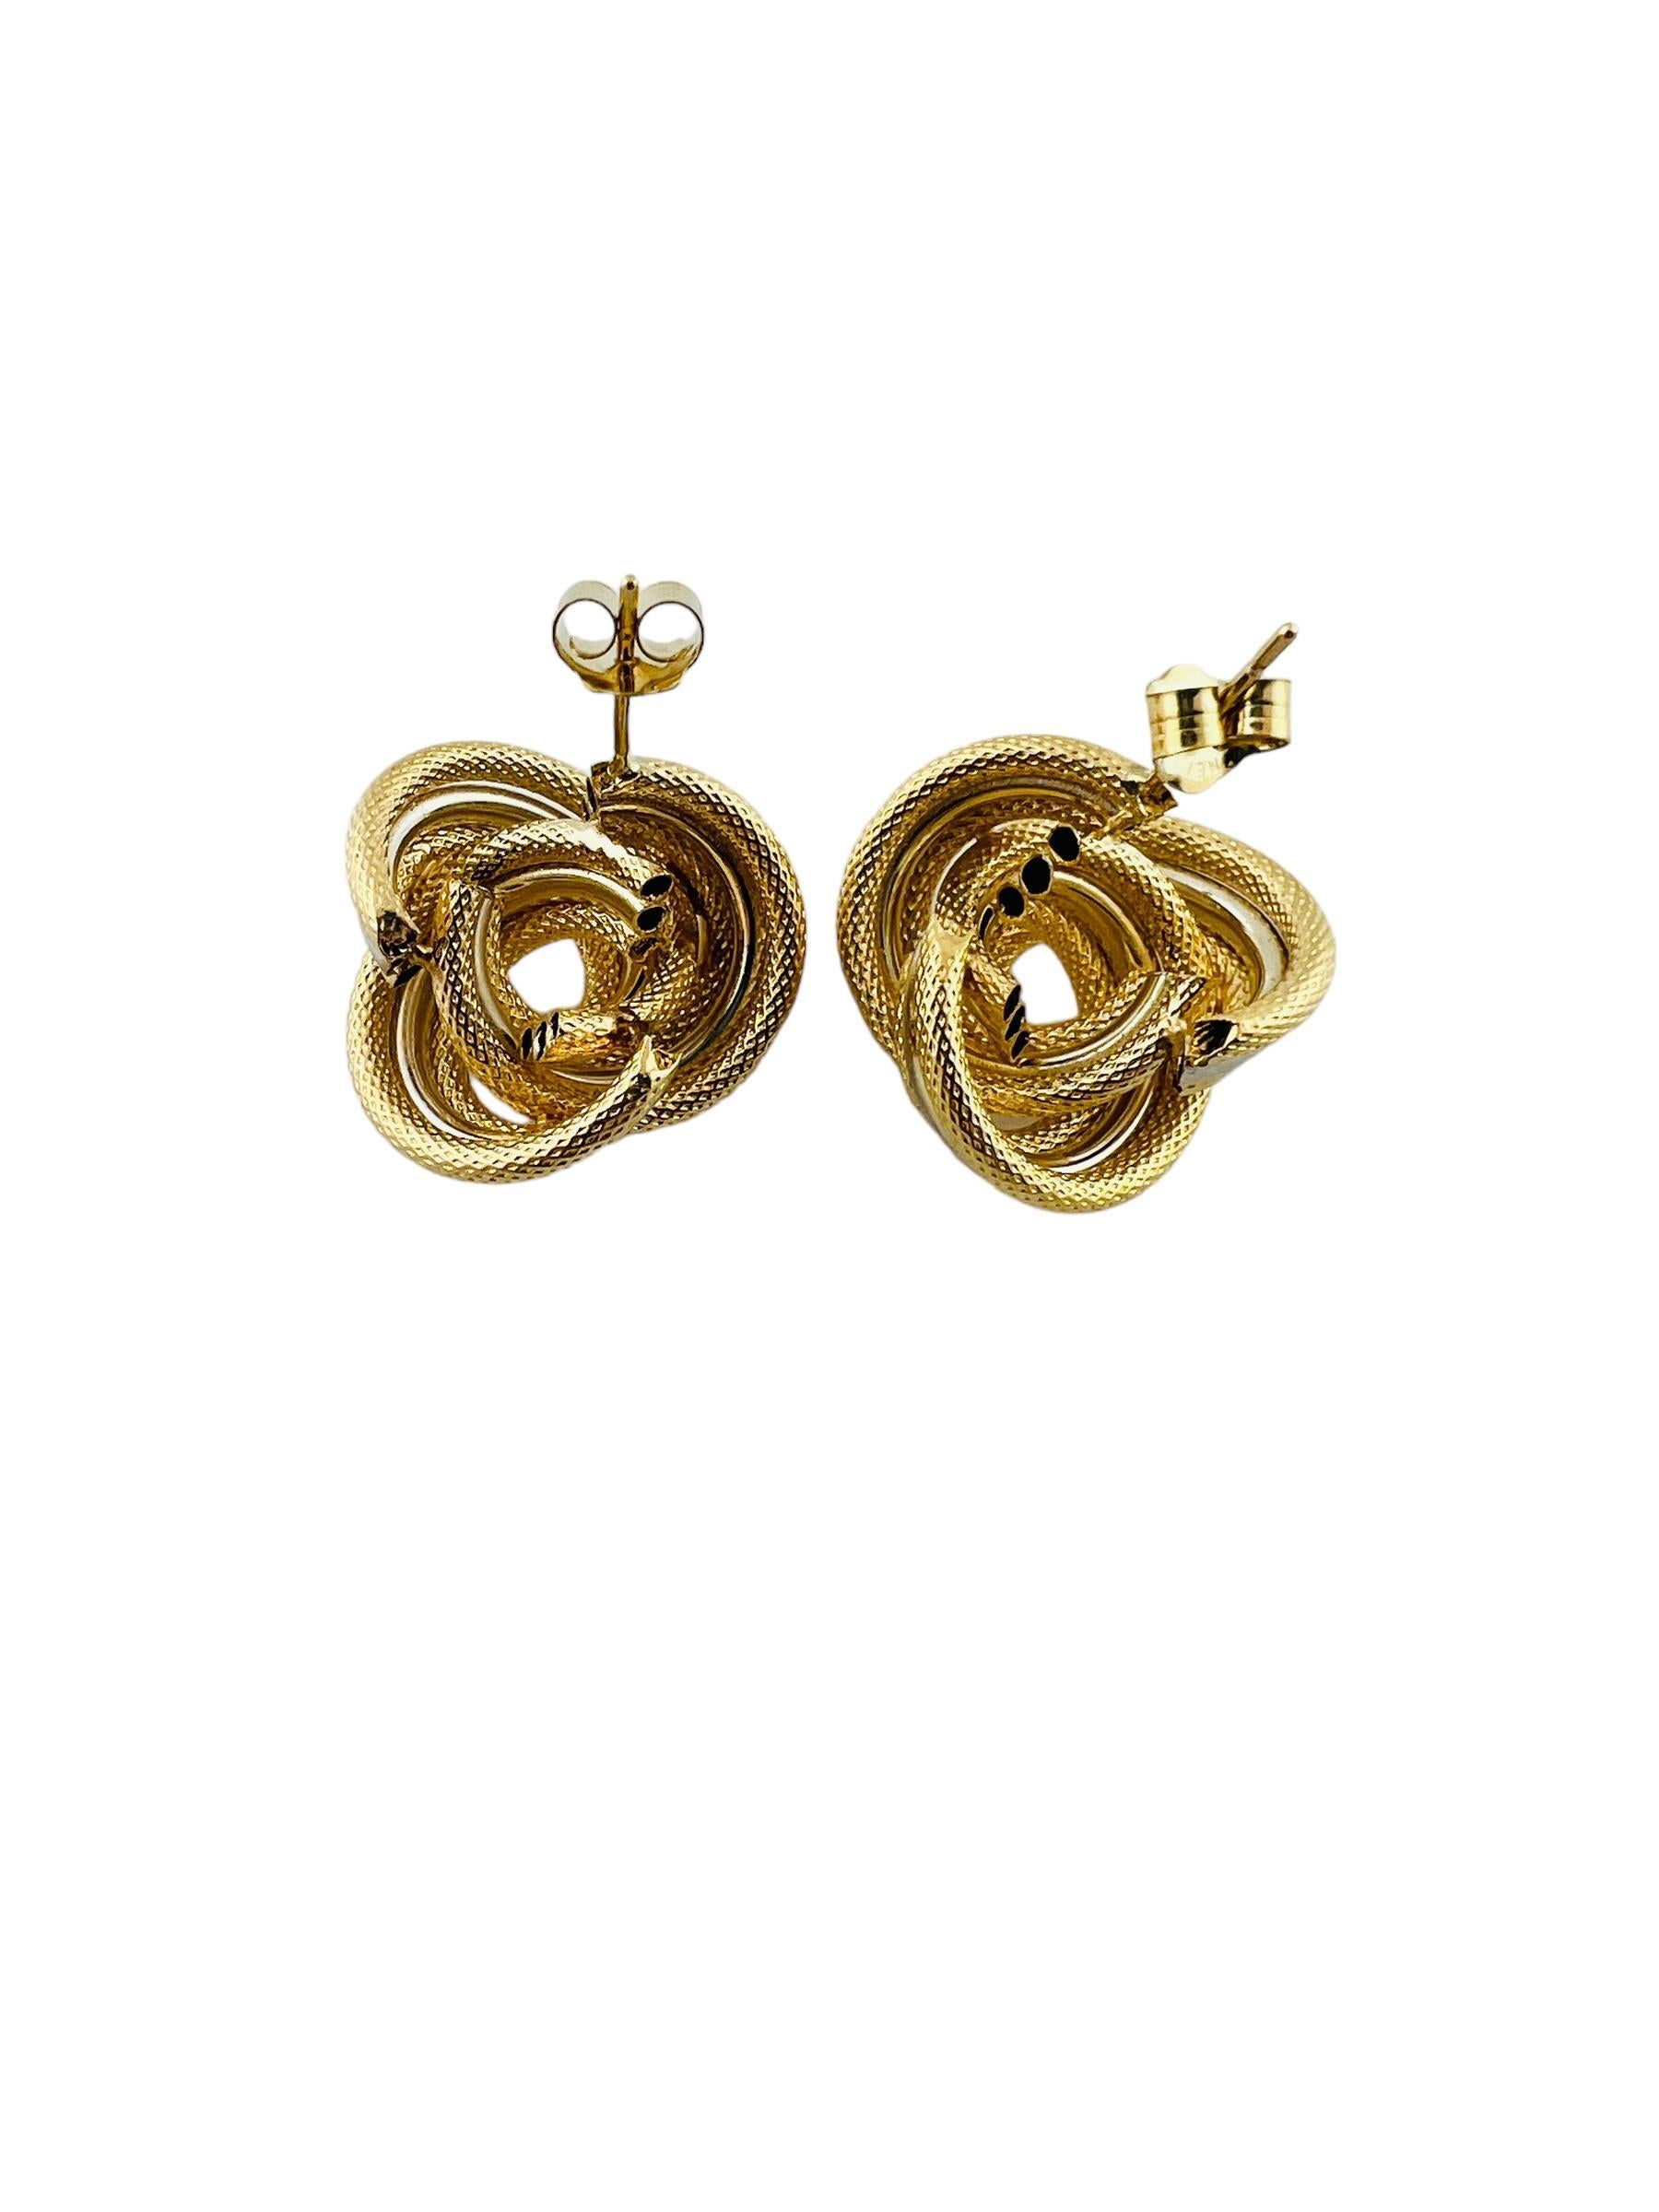 14K Yellow & White Gold Two Tone Knot Earrings #15935 In Good Condition For Sale In Washington Depot, CT